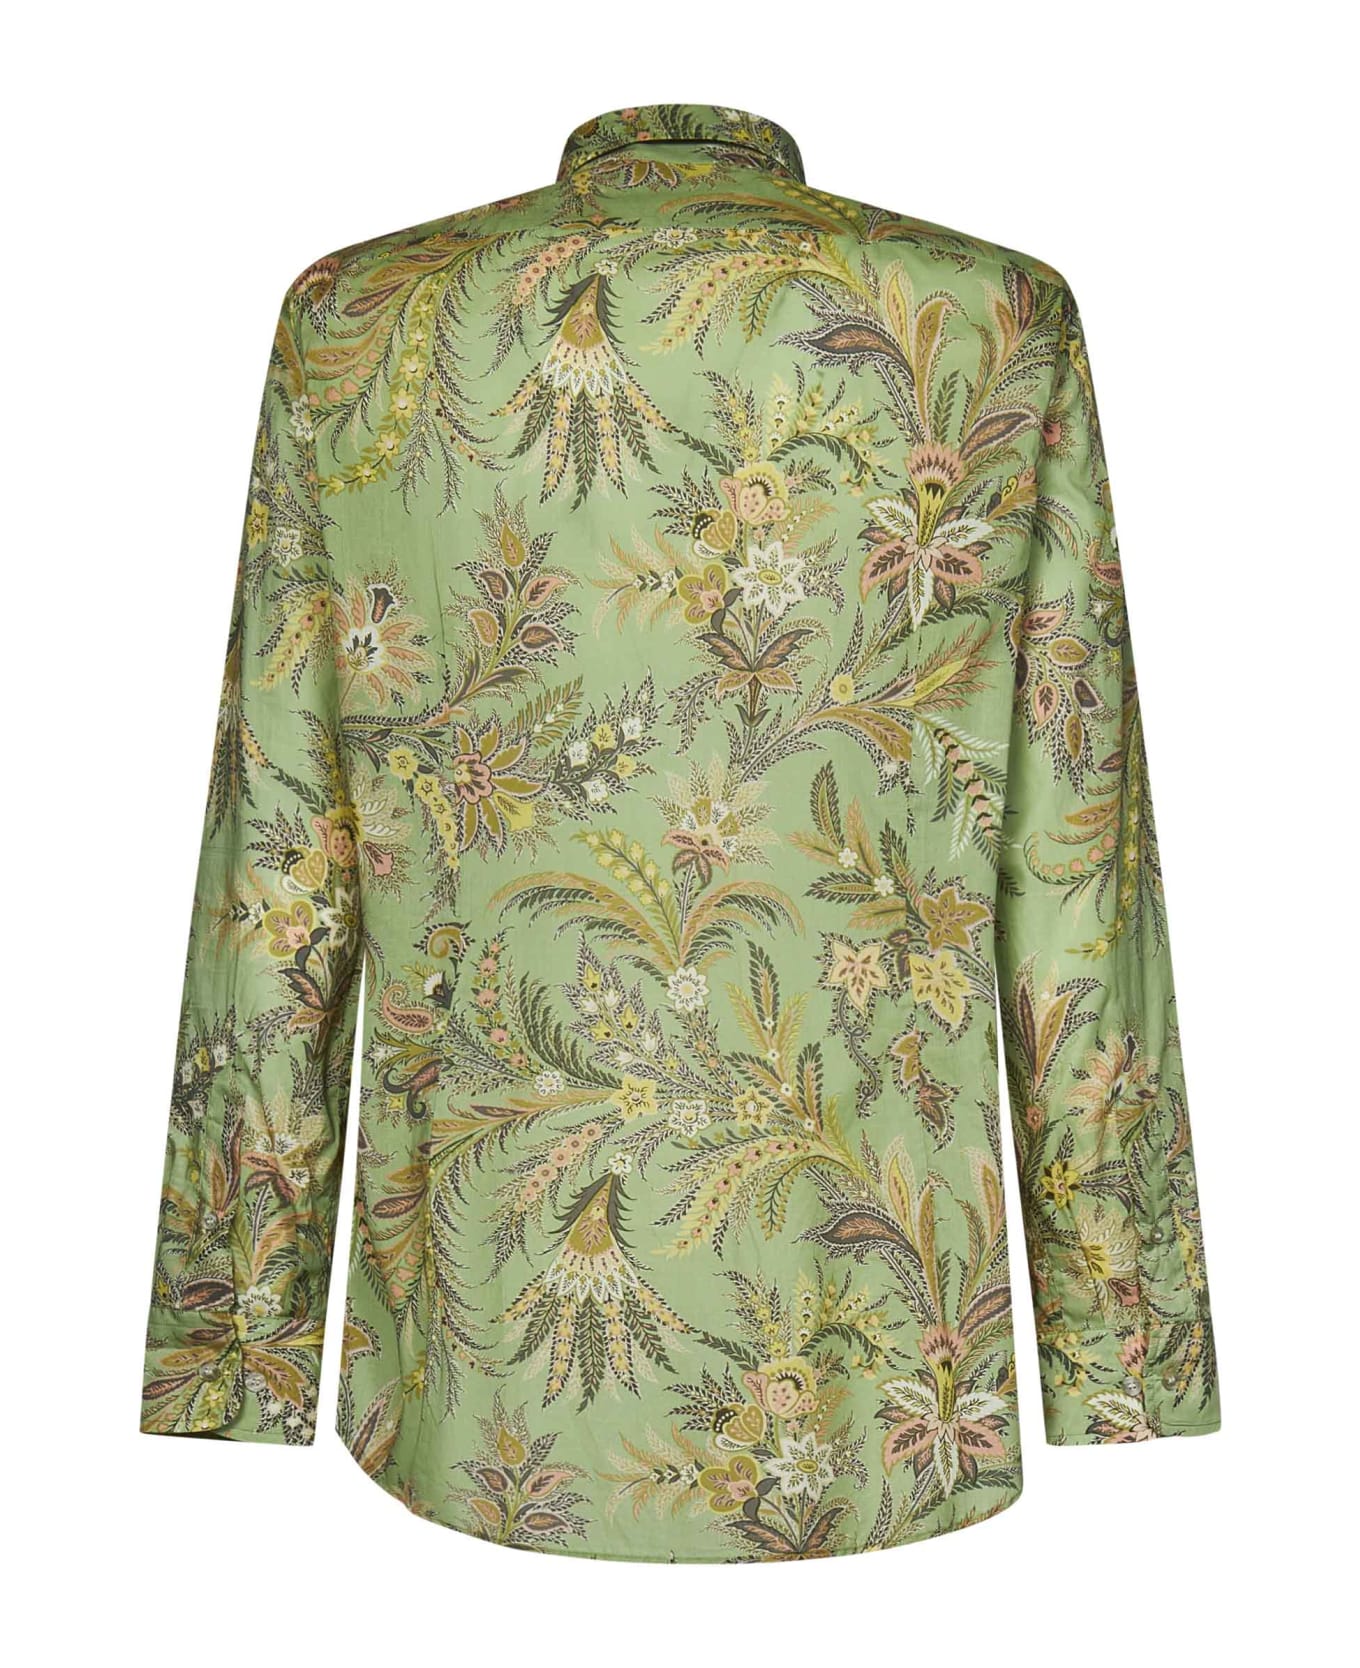 Etro Green Shirt With Paisley Print - Green